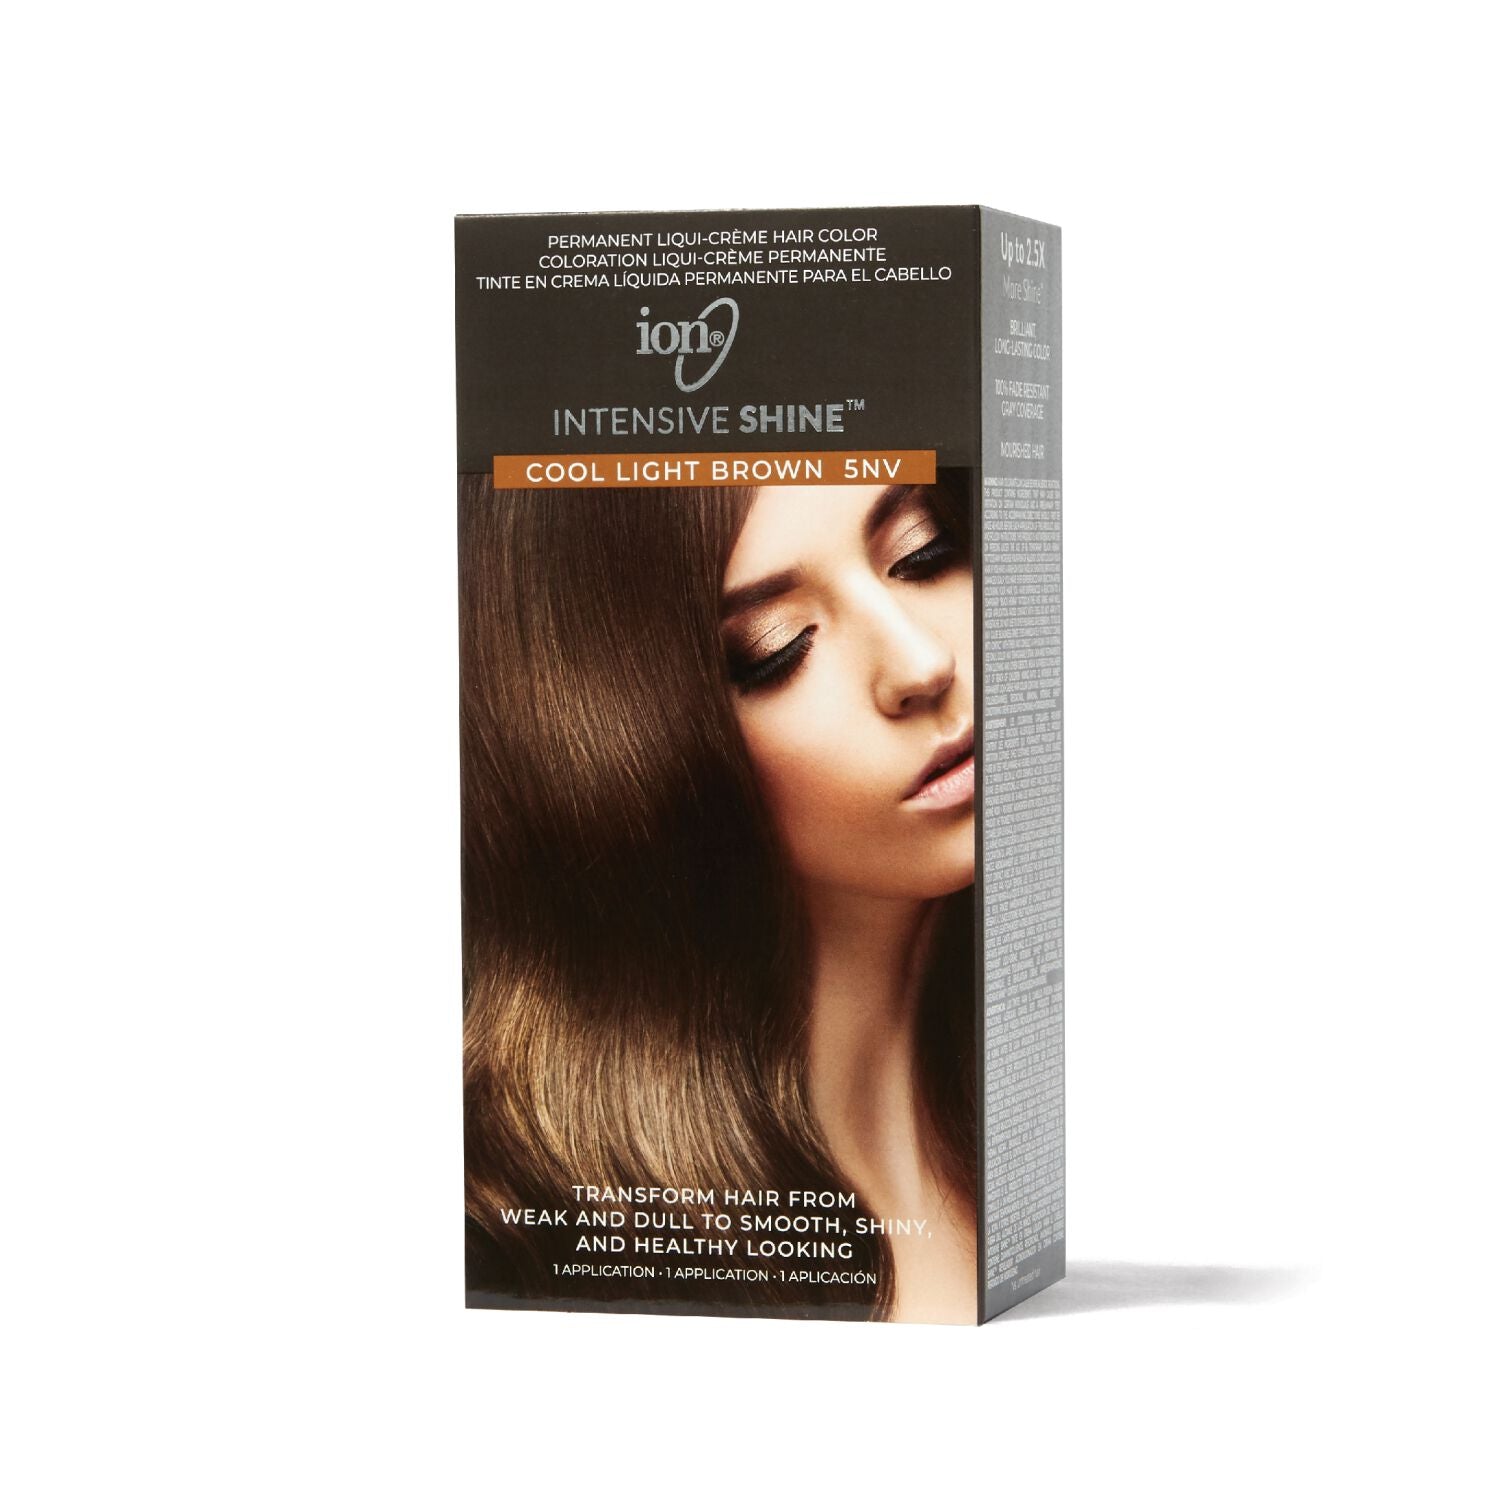 Intensive Shine  by   ion Intensive Shine Hair Color Kit Cool Light Brown 5NV